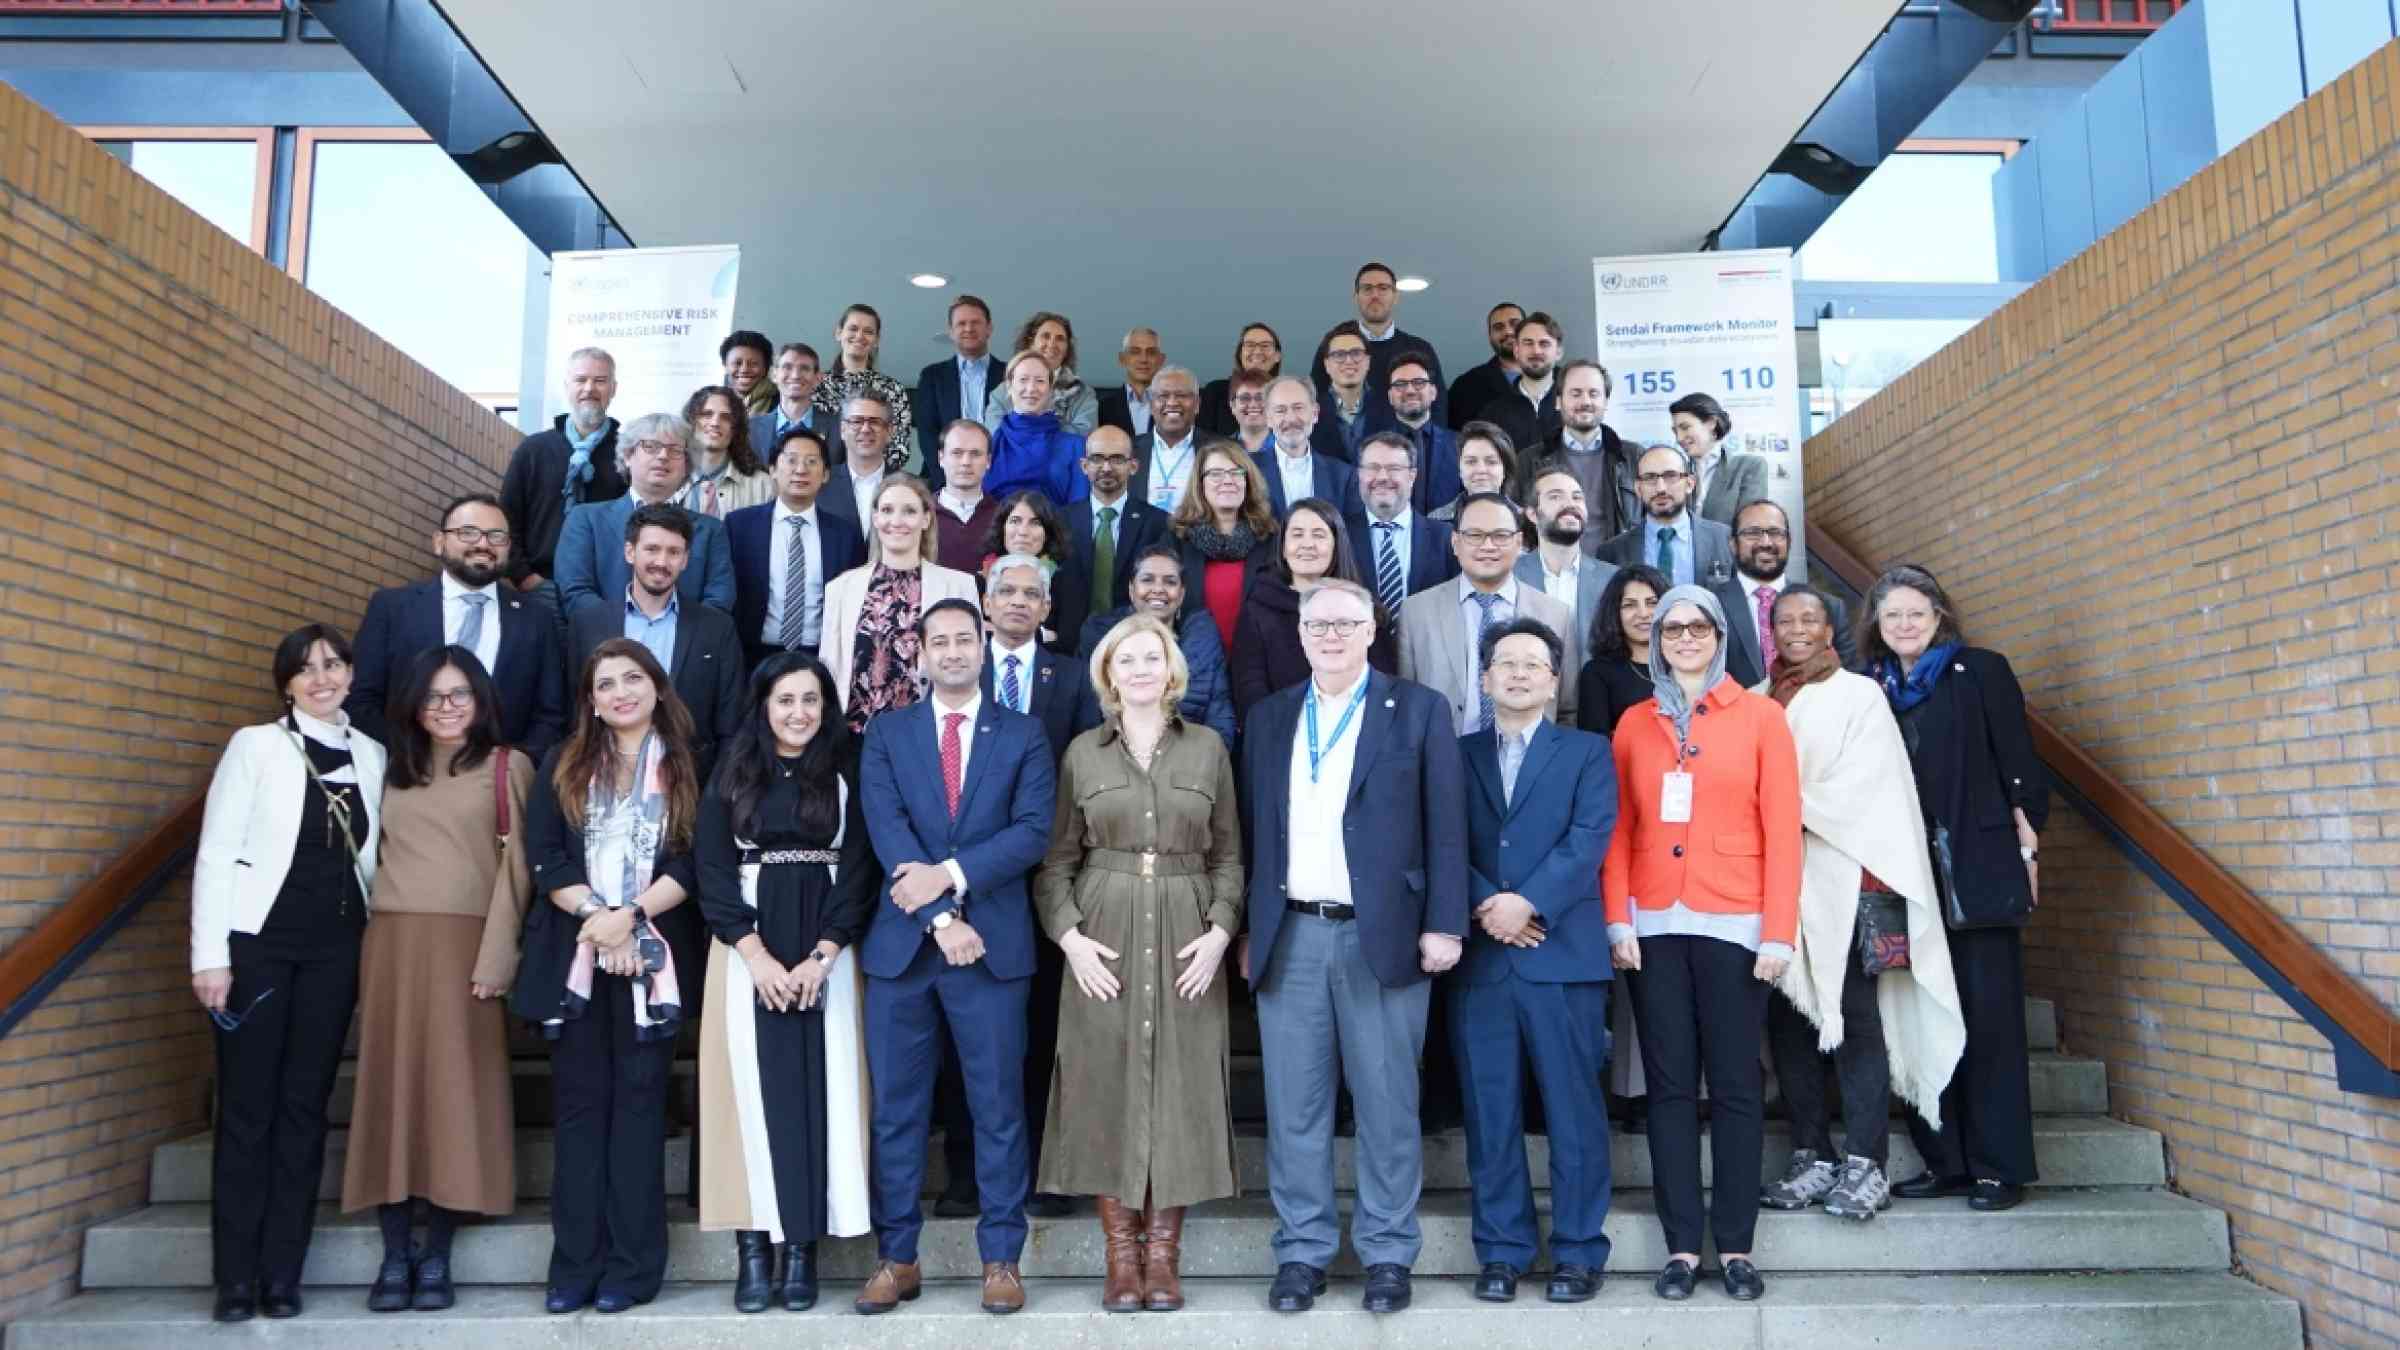 Group photo of the 50 experts gathered in Bonn today to assess the impact of slow-onset events and resultant losses and damages.